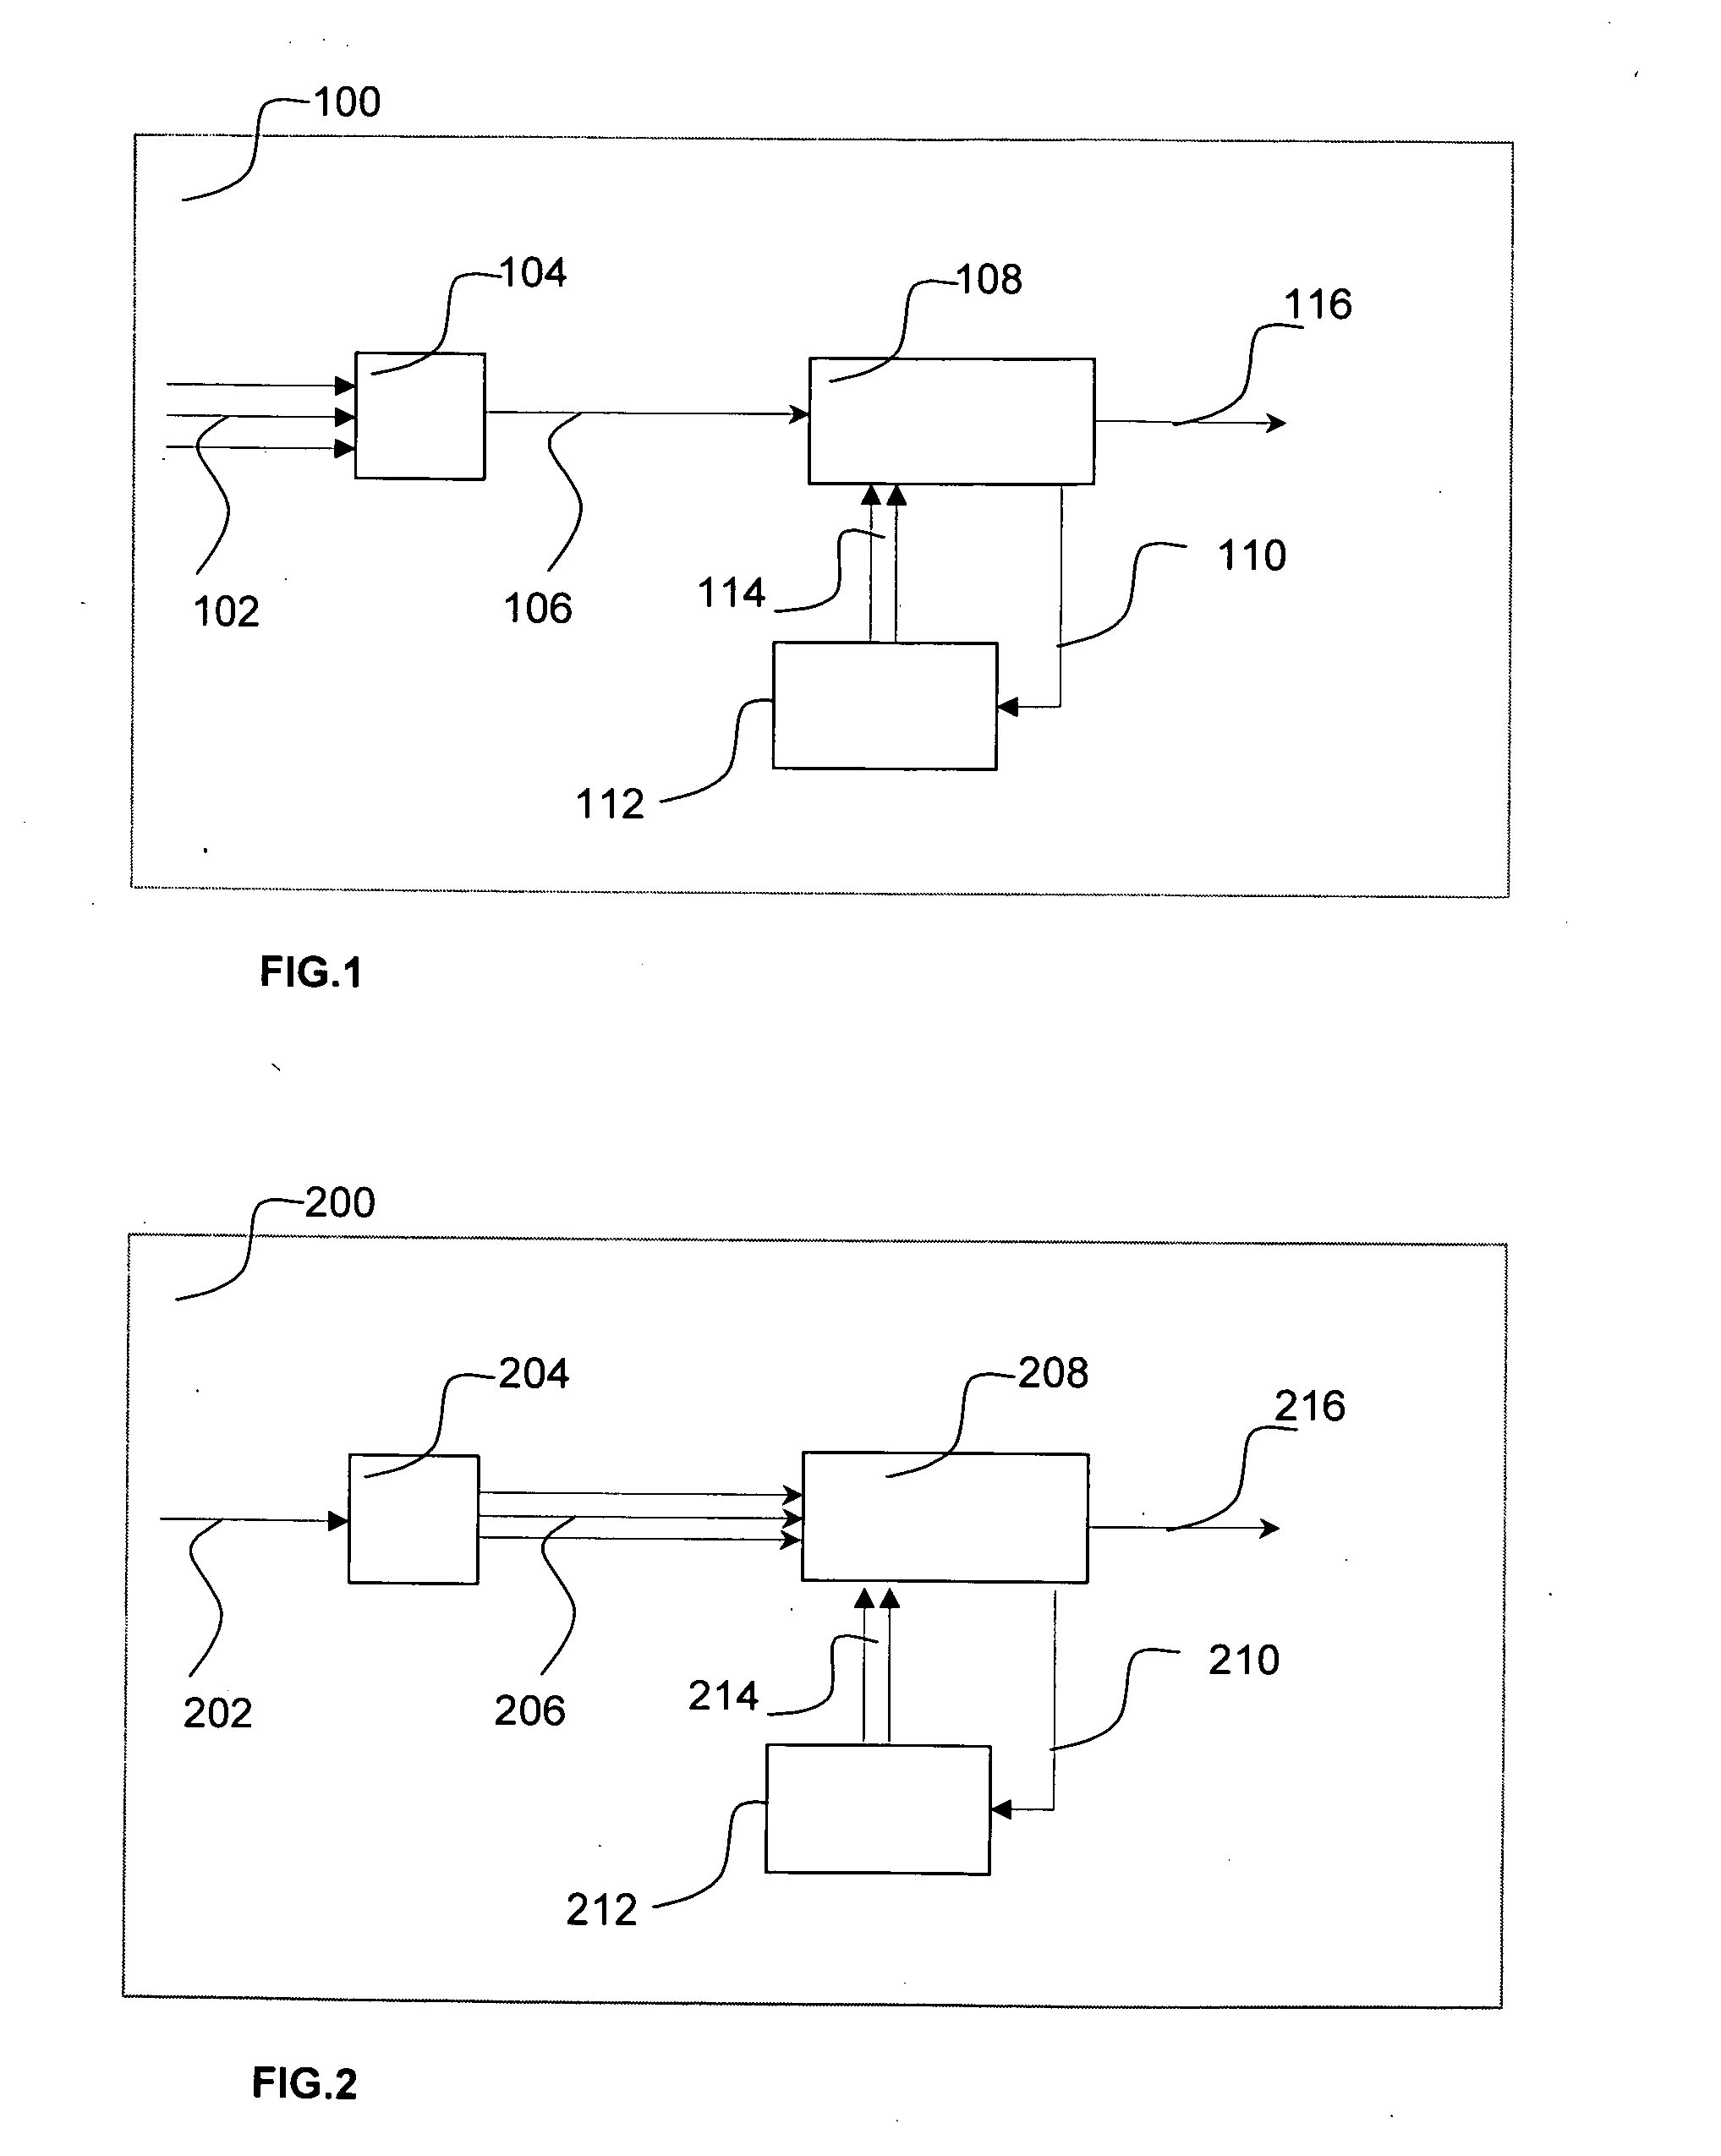 Method and apparatus for conducting media content search and management by integrating EPG and internet search systems